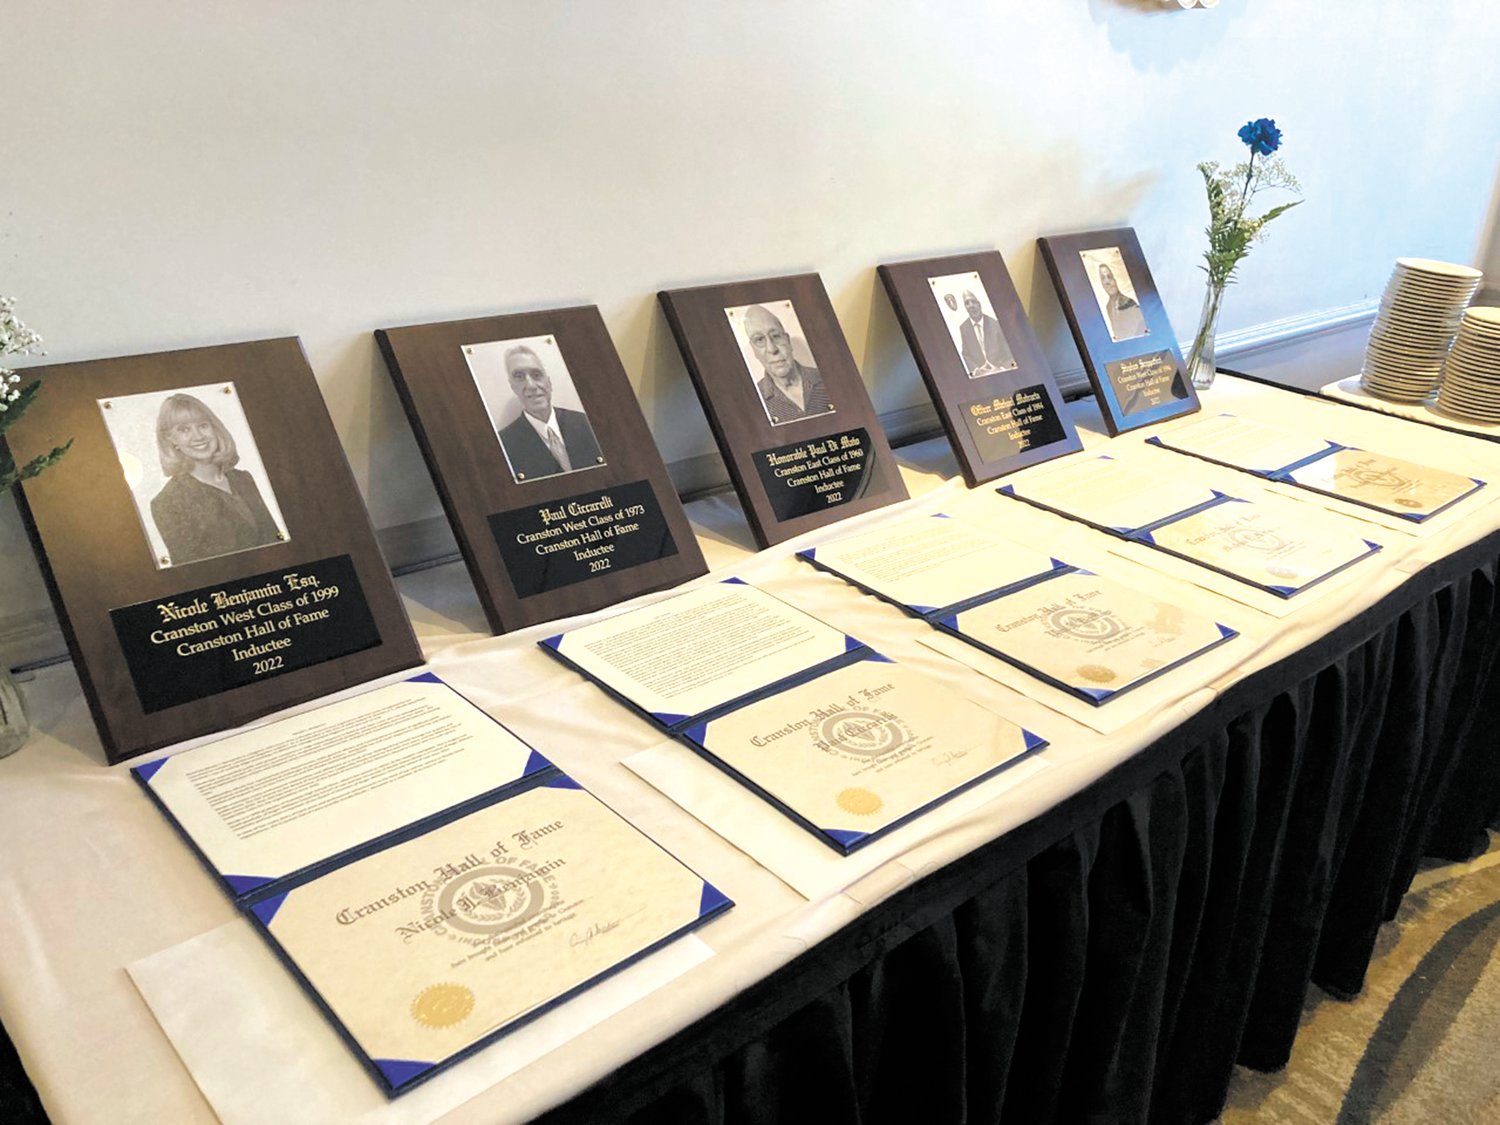 AWARDS AND ALLOCADES: Cranston Hall of Fame inductees were recognized Oct. 14 at the annual Cranston Hall of Fame Induction Ceremony at Alpine Country Club in Cranston. (Herald photo)